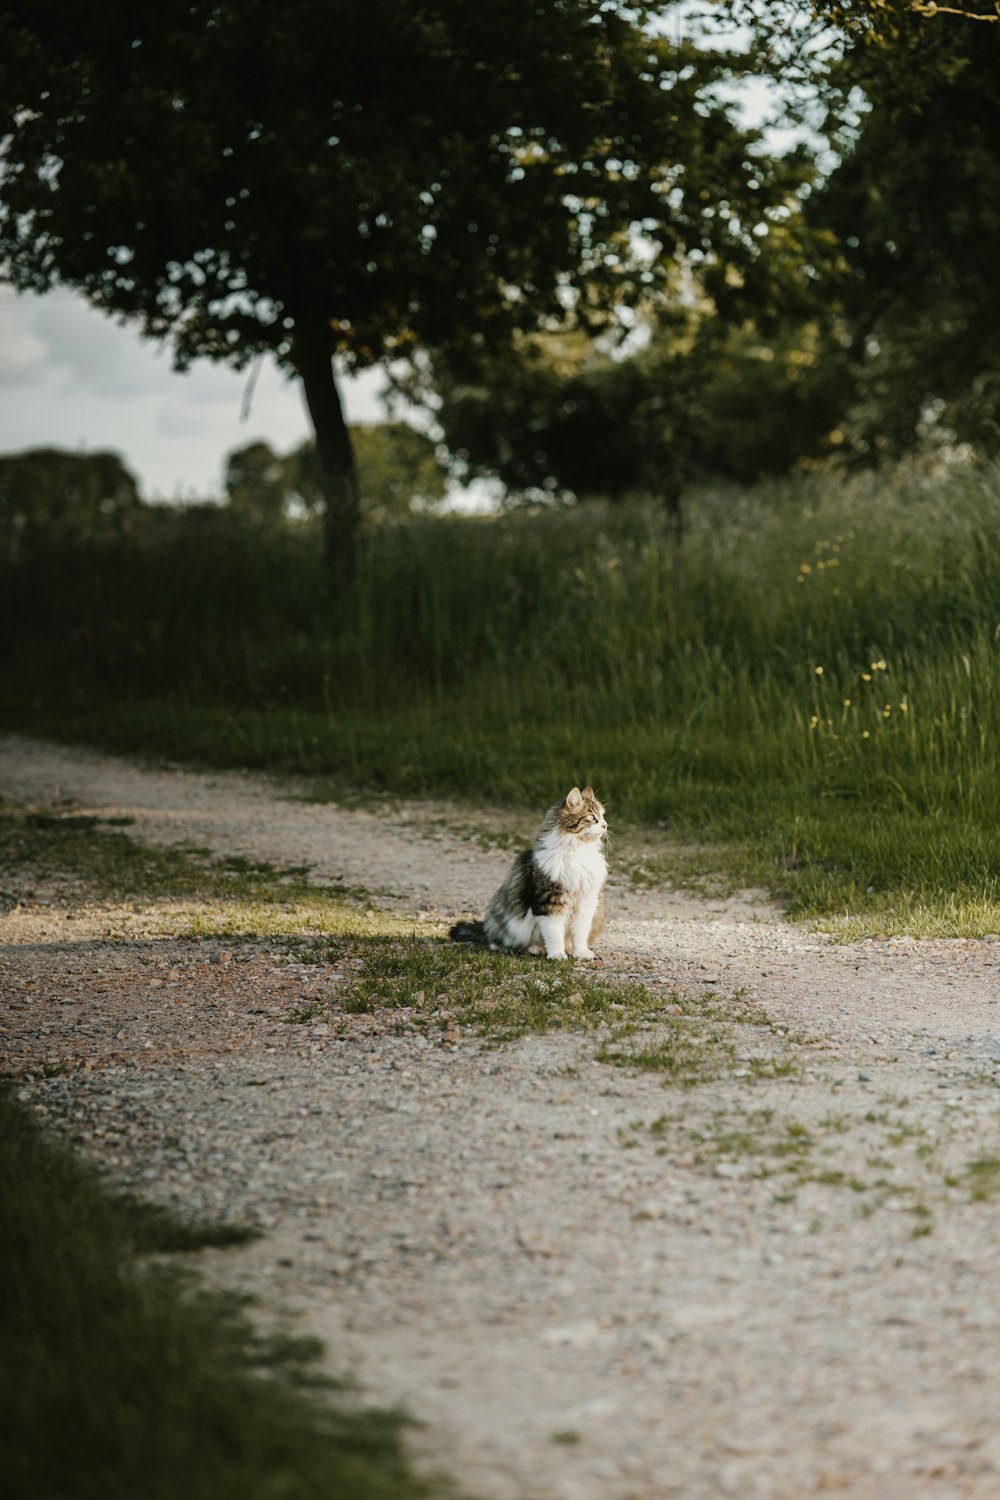 a cat sitting on the side of a dirt road